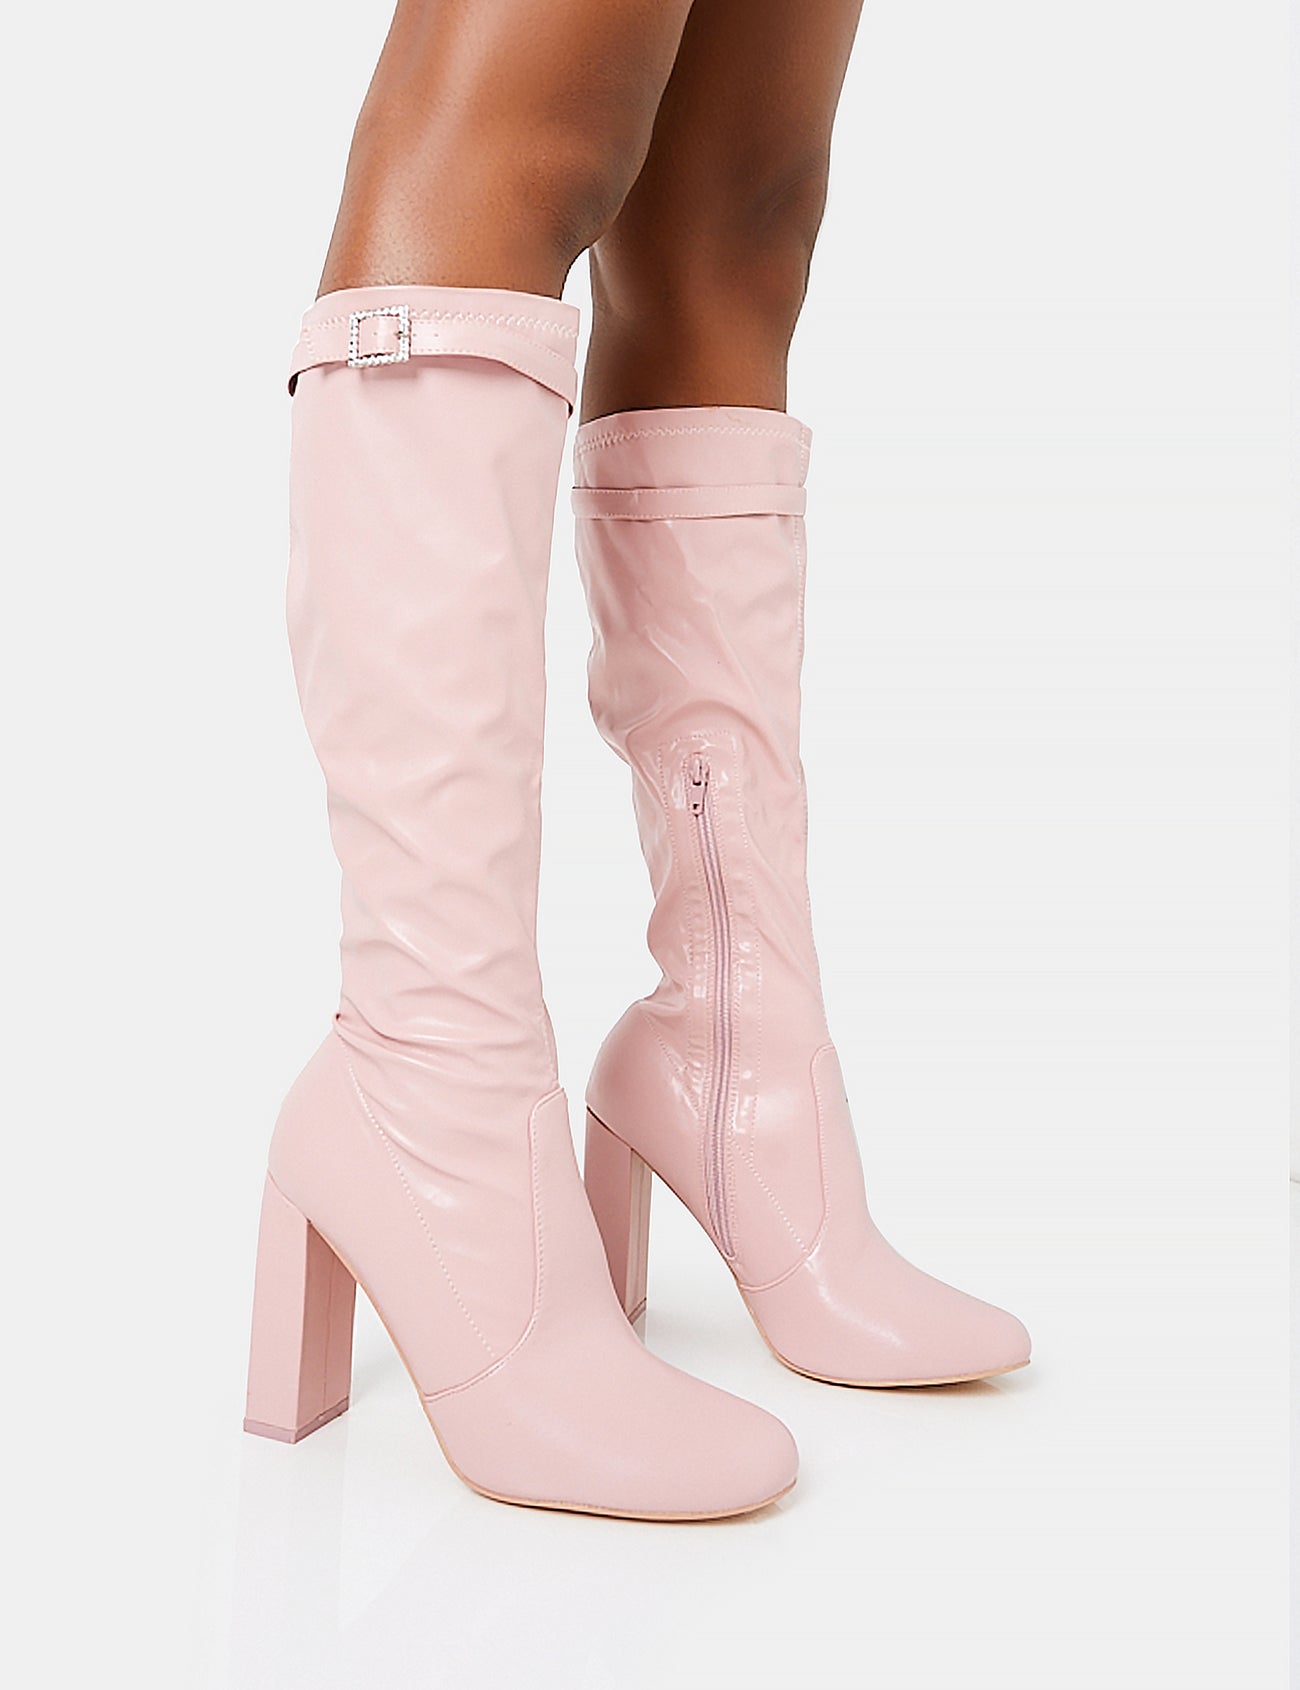 Public desire ROUNDED TOE KNEE HIGH BLOCK HEELED BOOTS